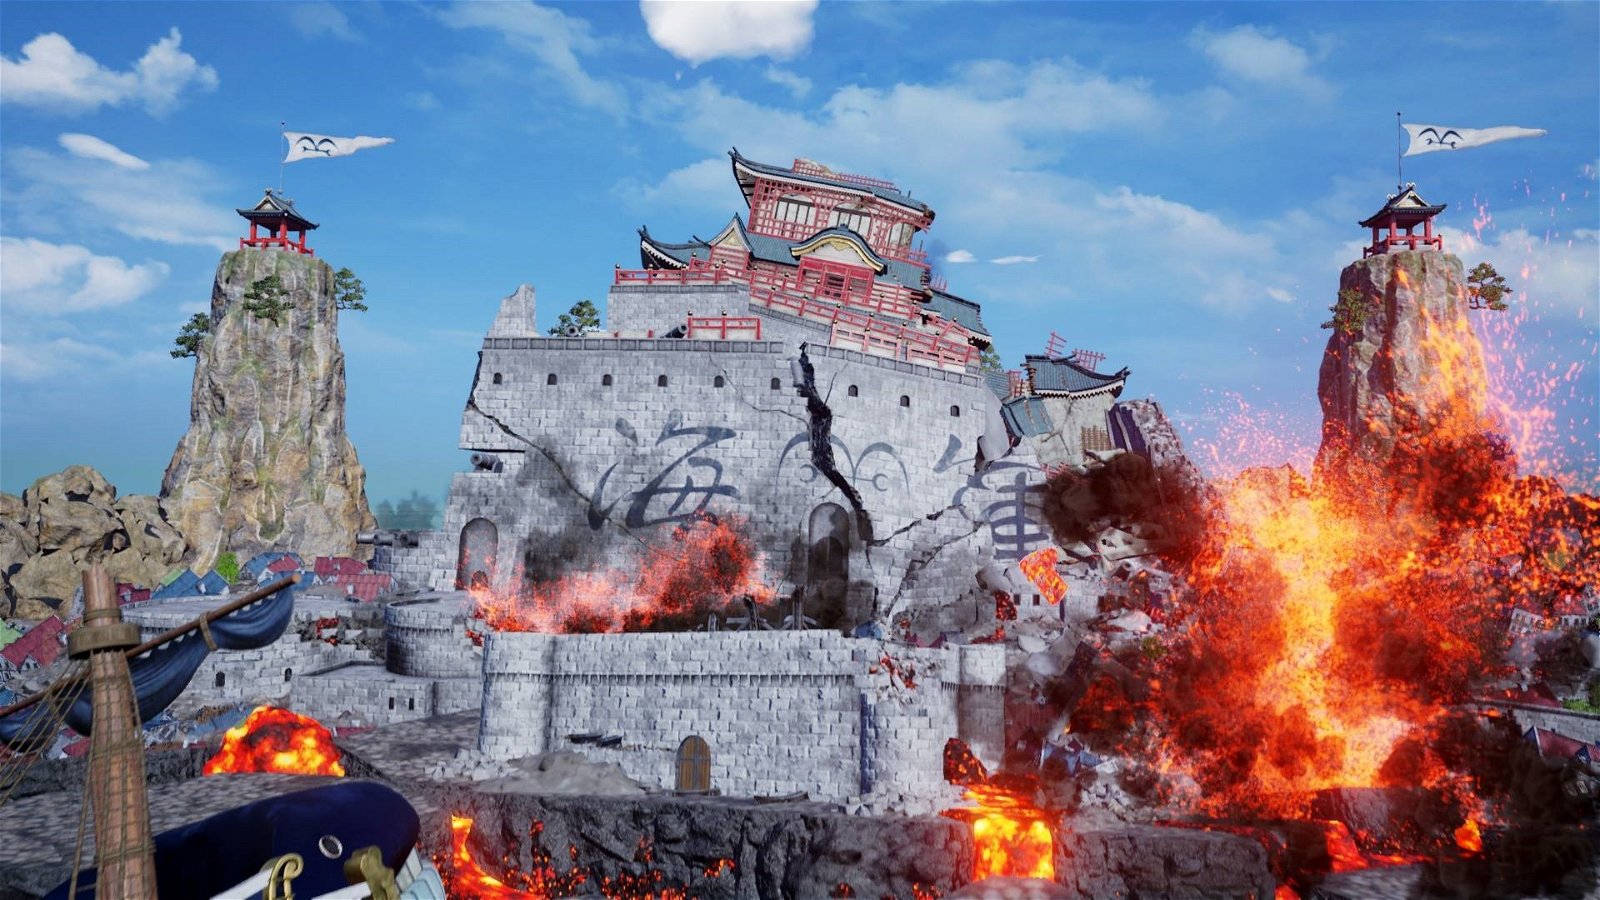 Jump Force, PlayStation 4, Xbox One, release date, gameplay, price, features, US, North America, Europe, update, Marineford Stage, new stage, new screenshots, One Piece's Marineford Stage